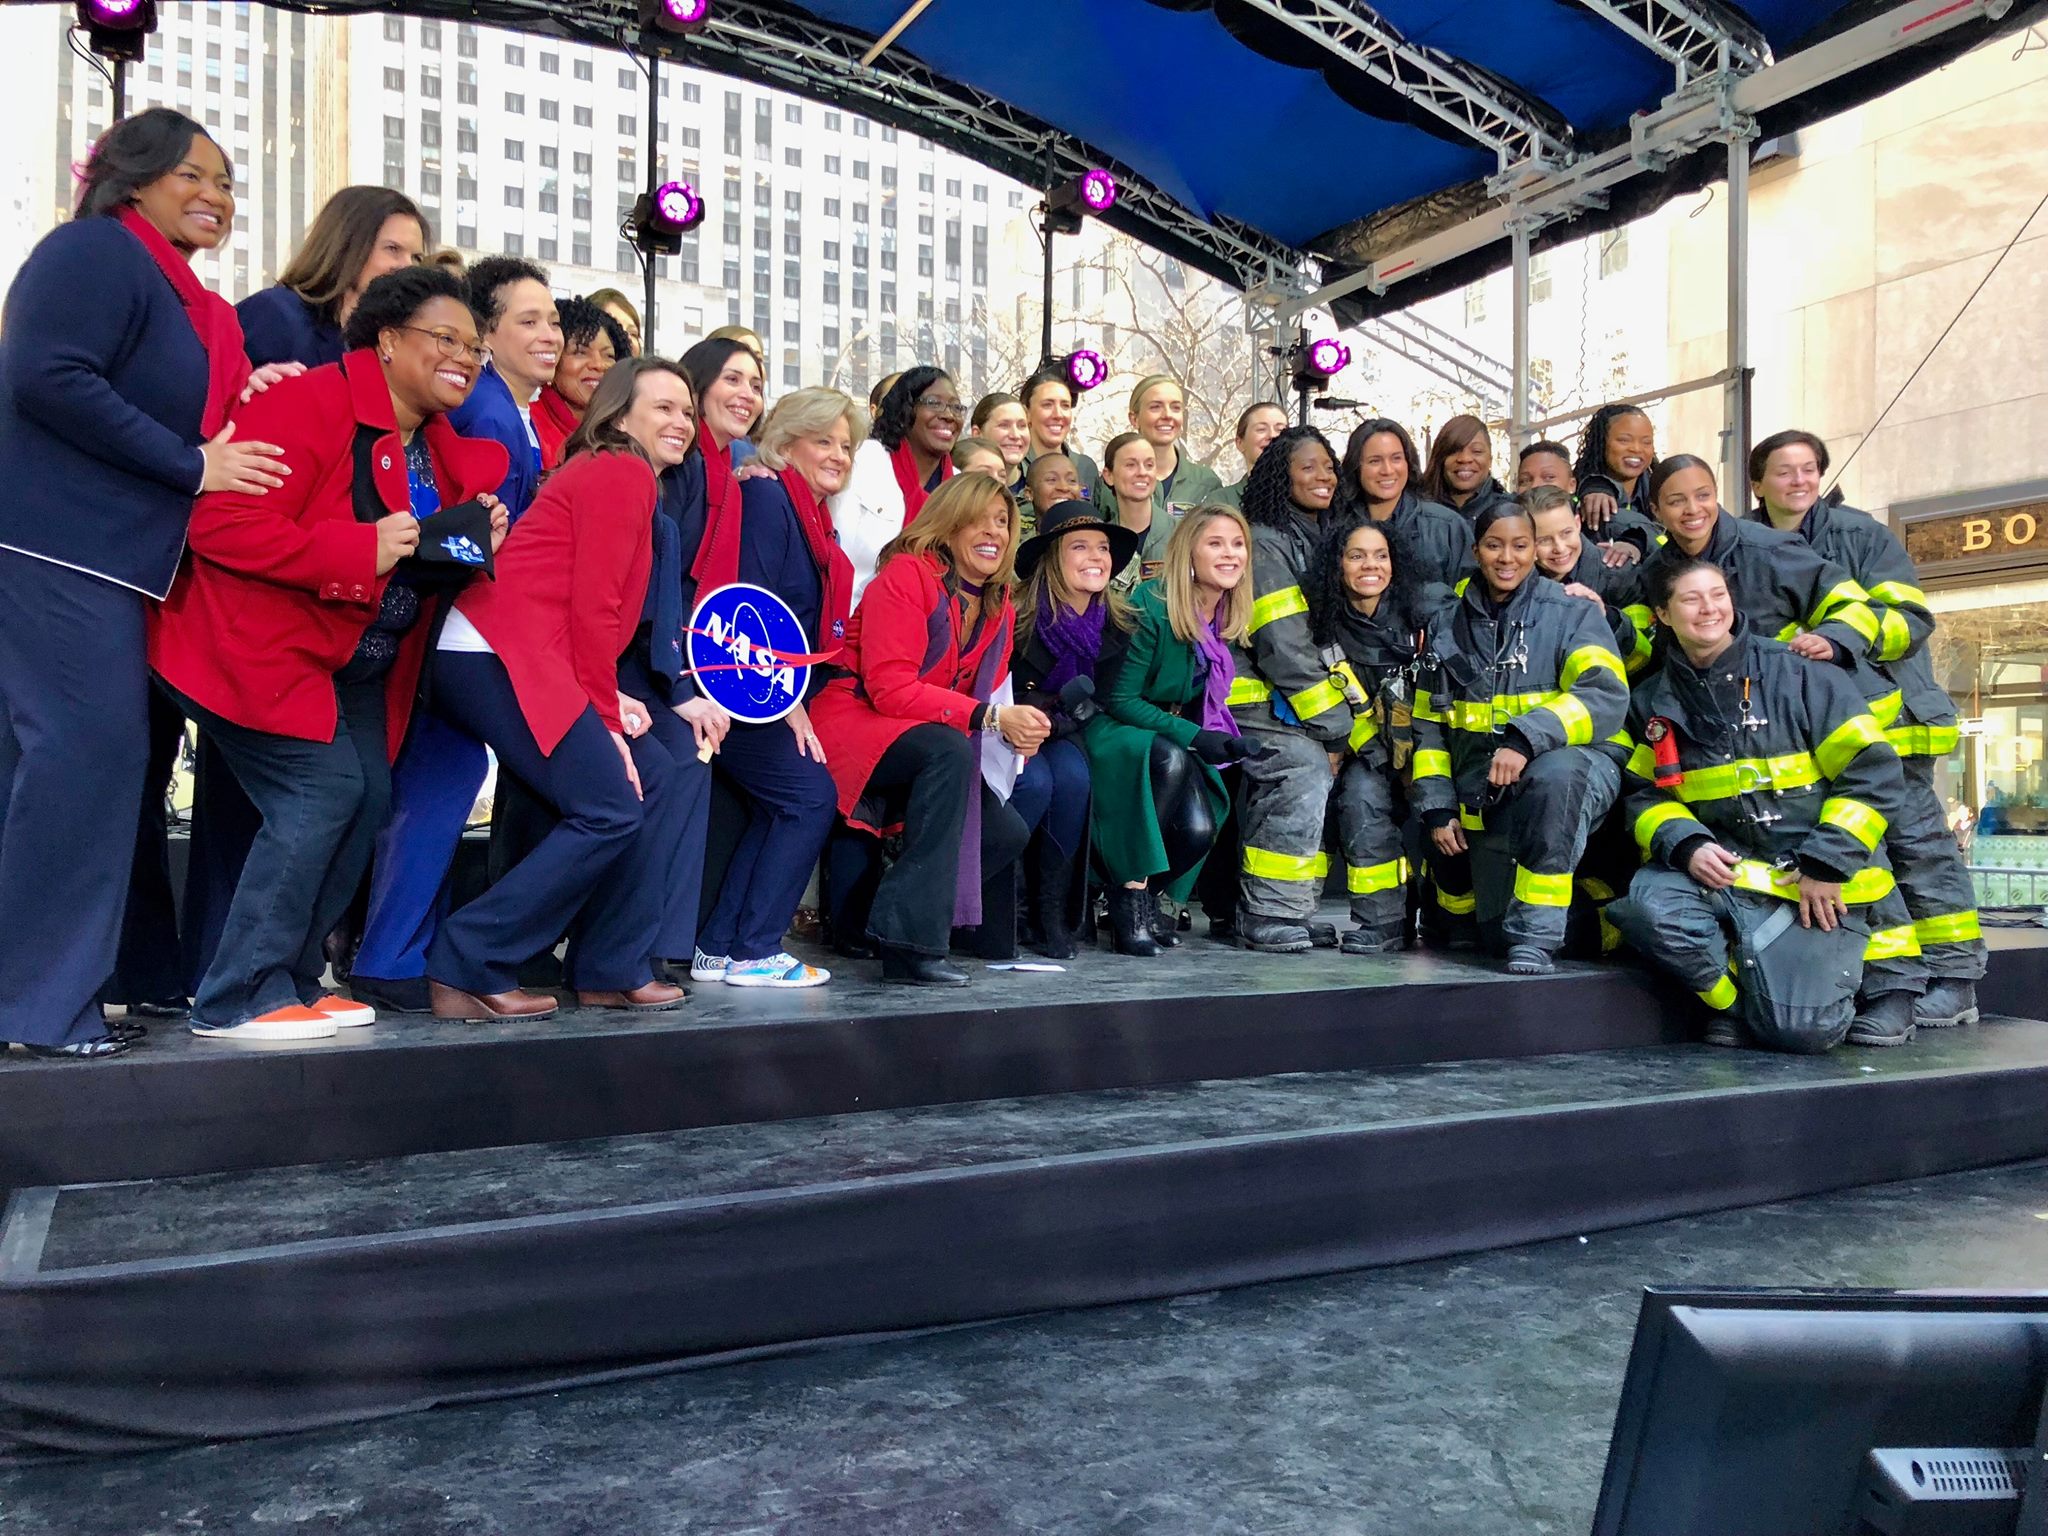 Women from Marshall Space Flight Center, in red and navy at left, celebrate International Women’s Day with NBC’s Today Show.